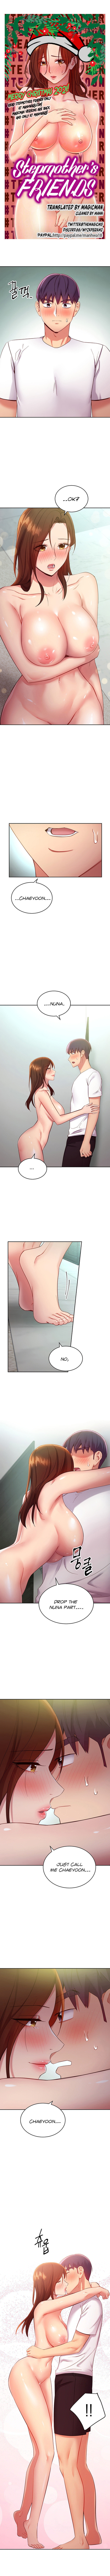 Panel Image 1 for chapter 97 of manhwa Stepmother